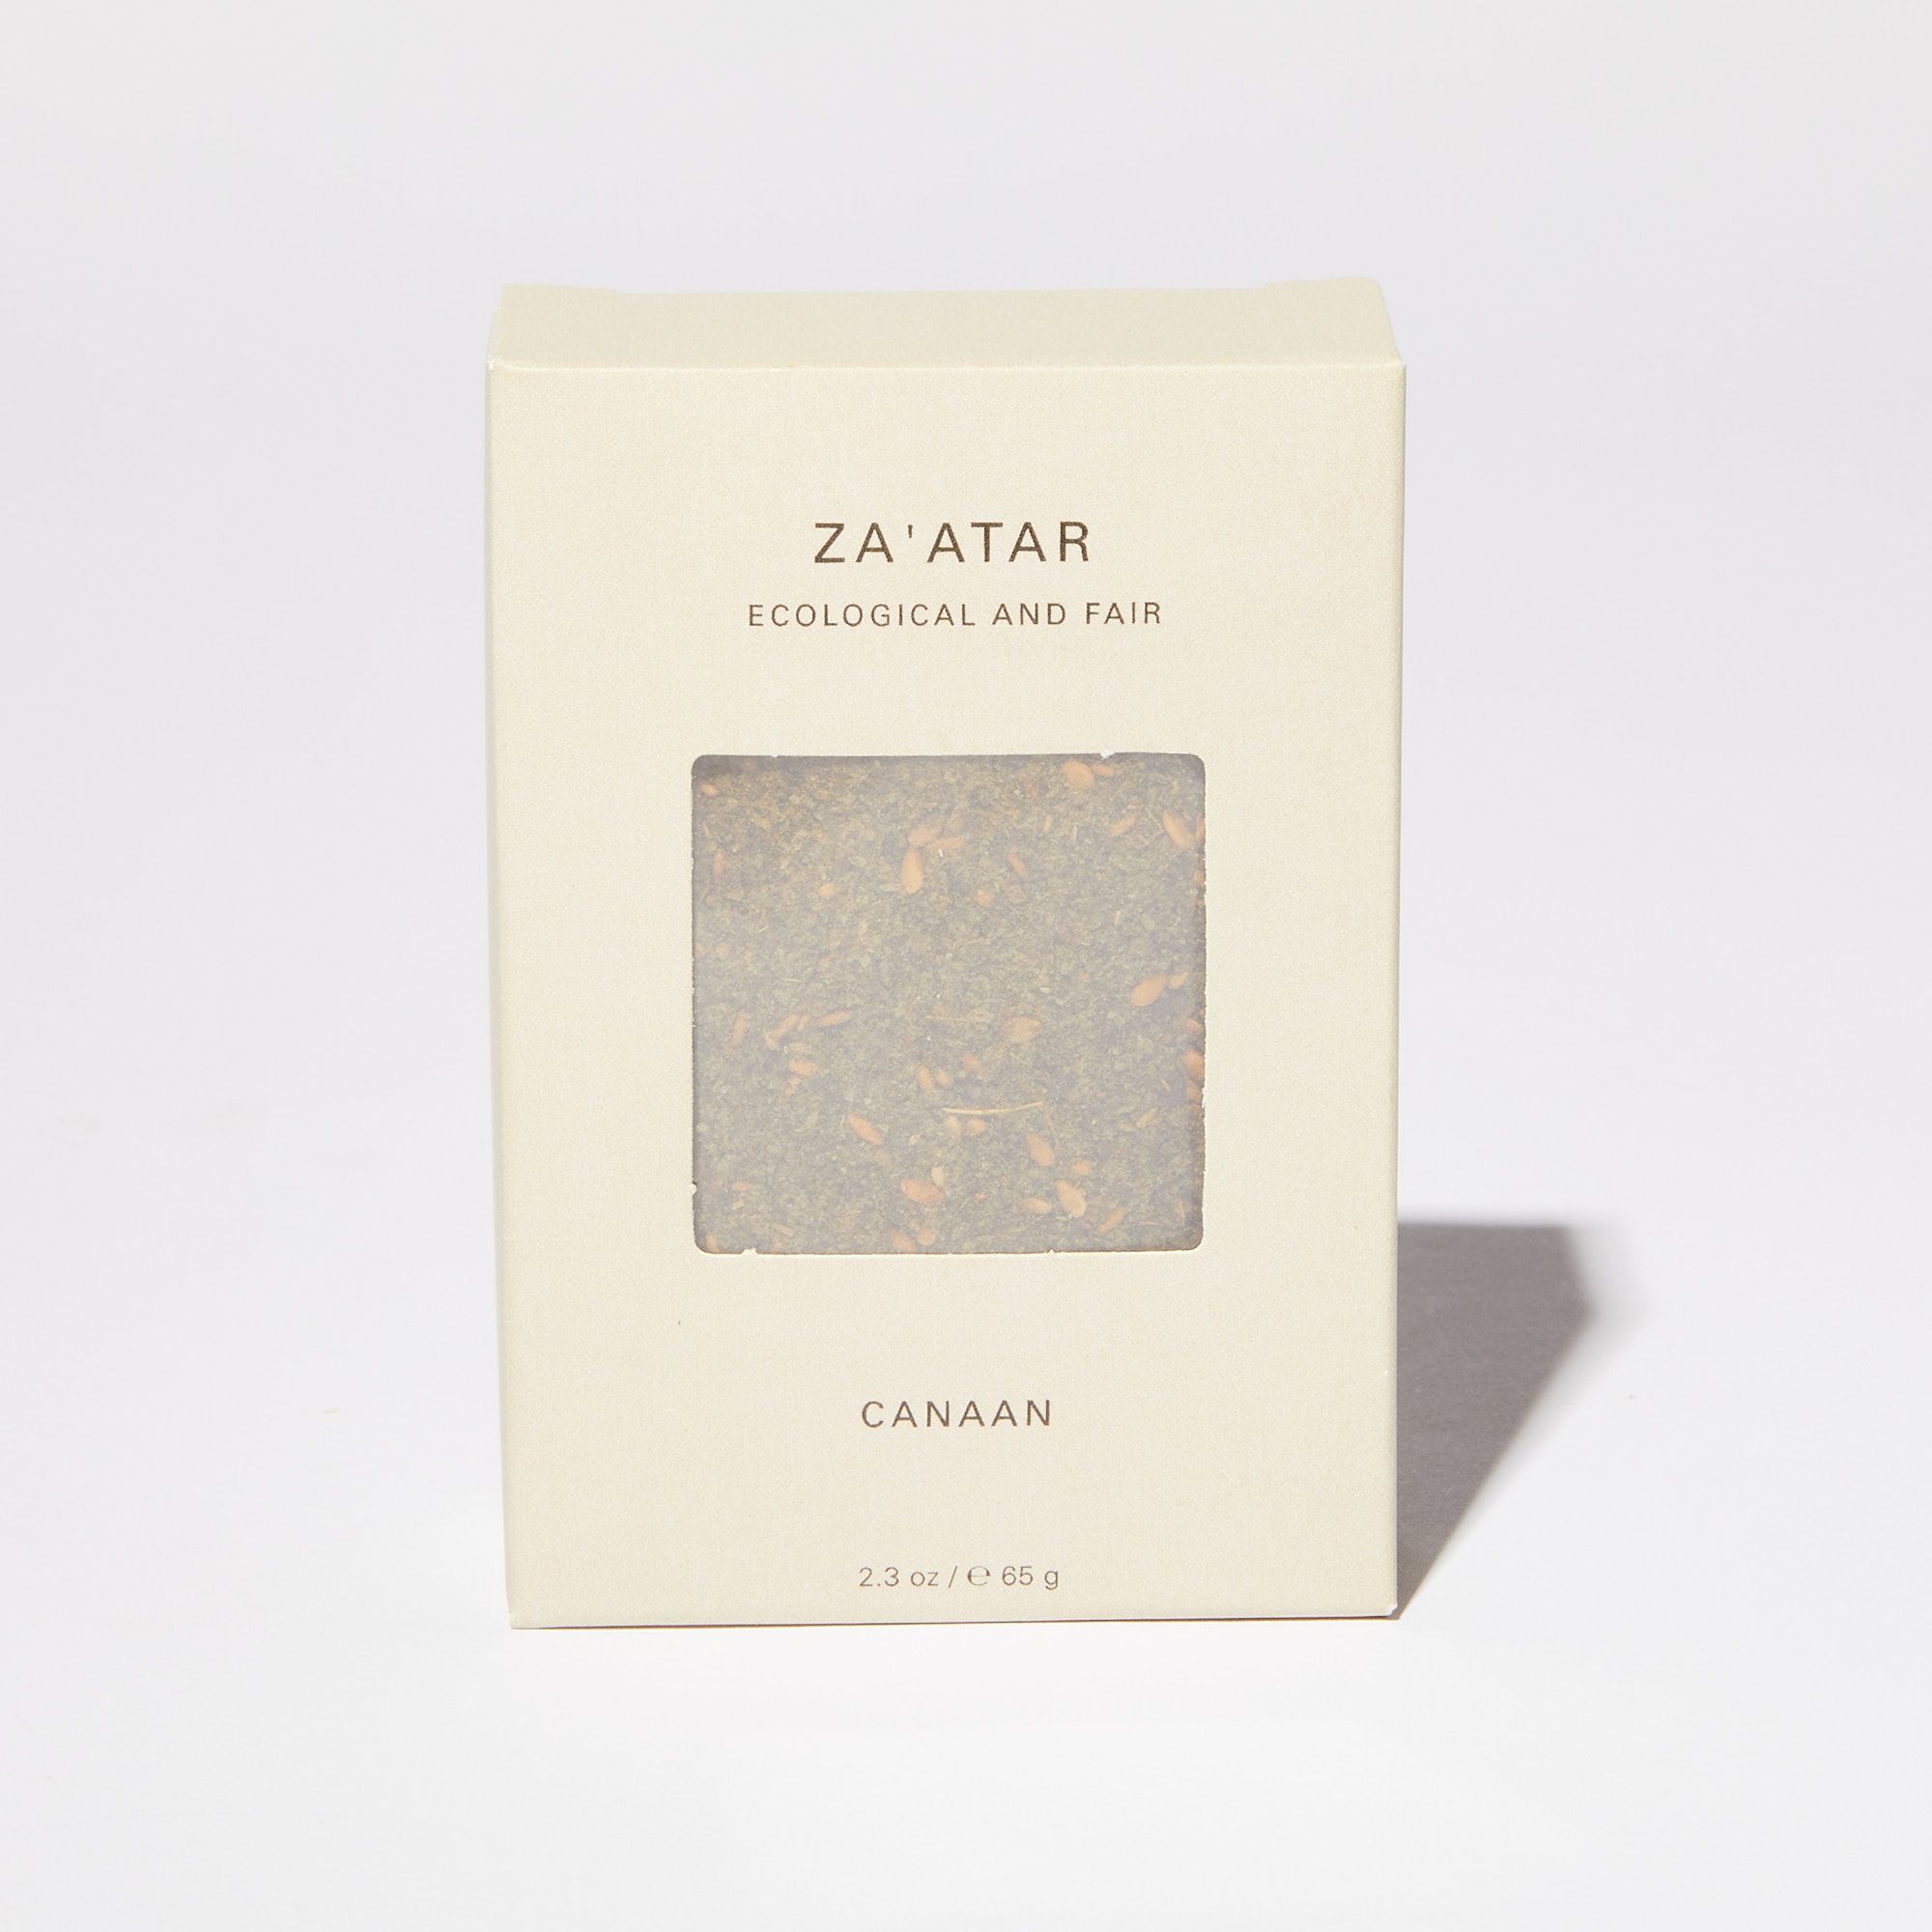 Cream box that reads "Za'atar" "Ecological and Fair" with a translucent panel revealing a green spice mix